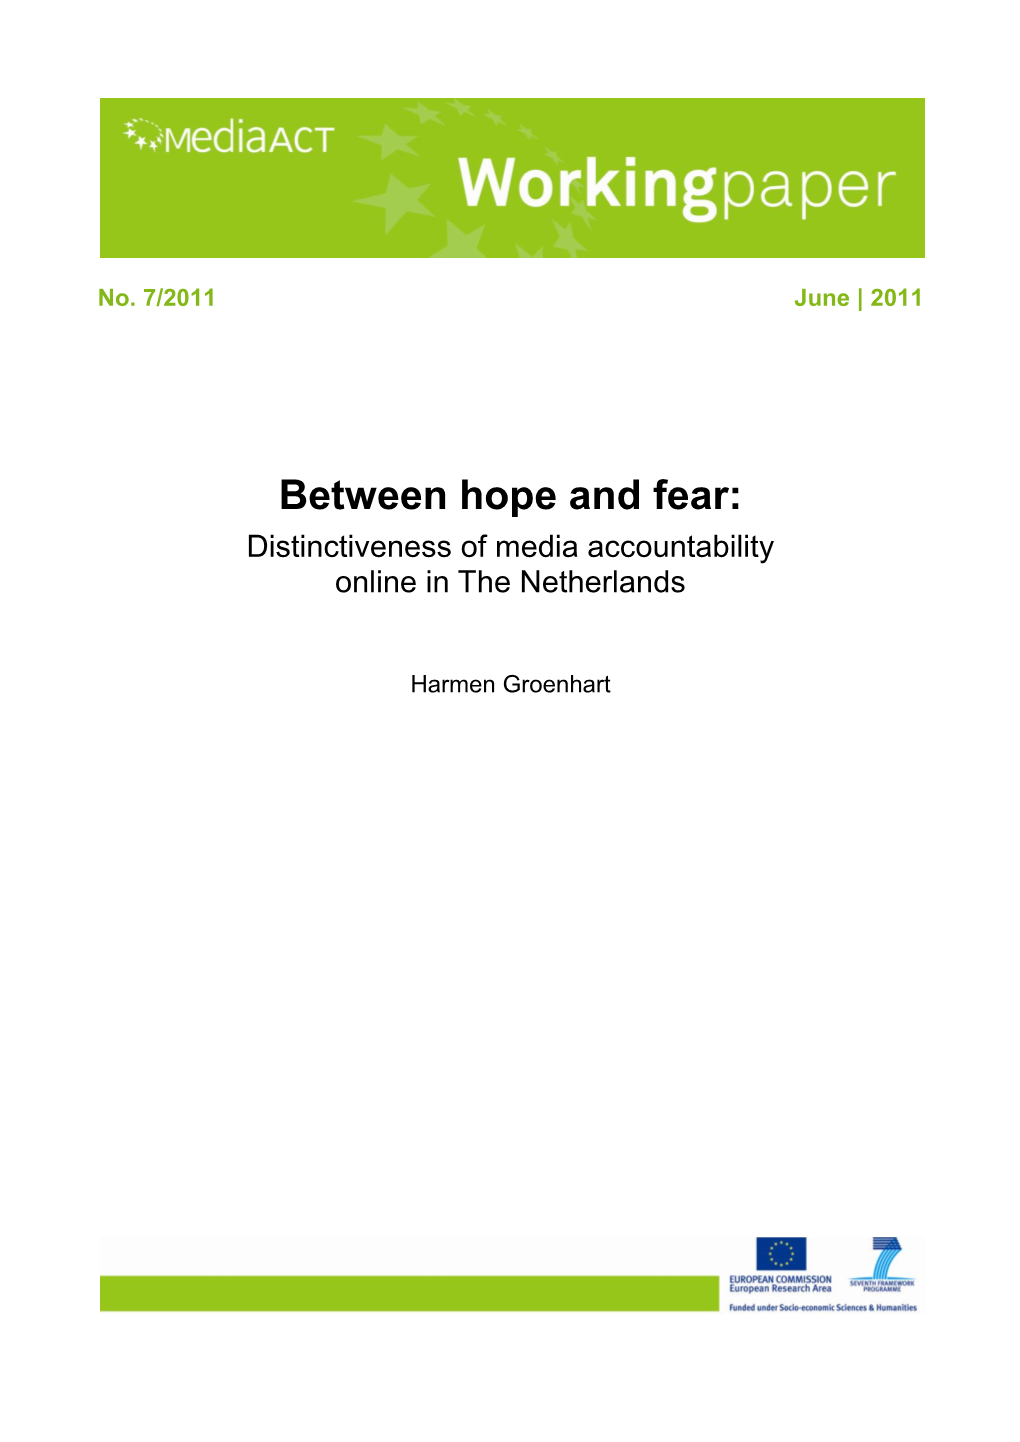 Between Hope and Fear: Distinctiveness of Media Accountability Online in the Netherlands